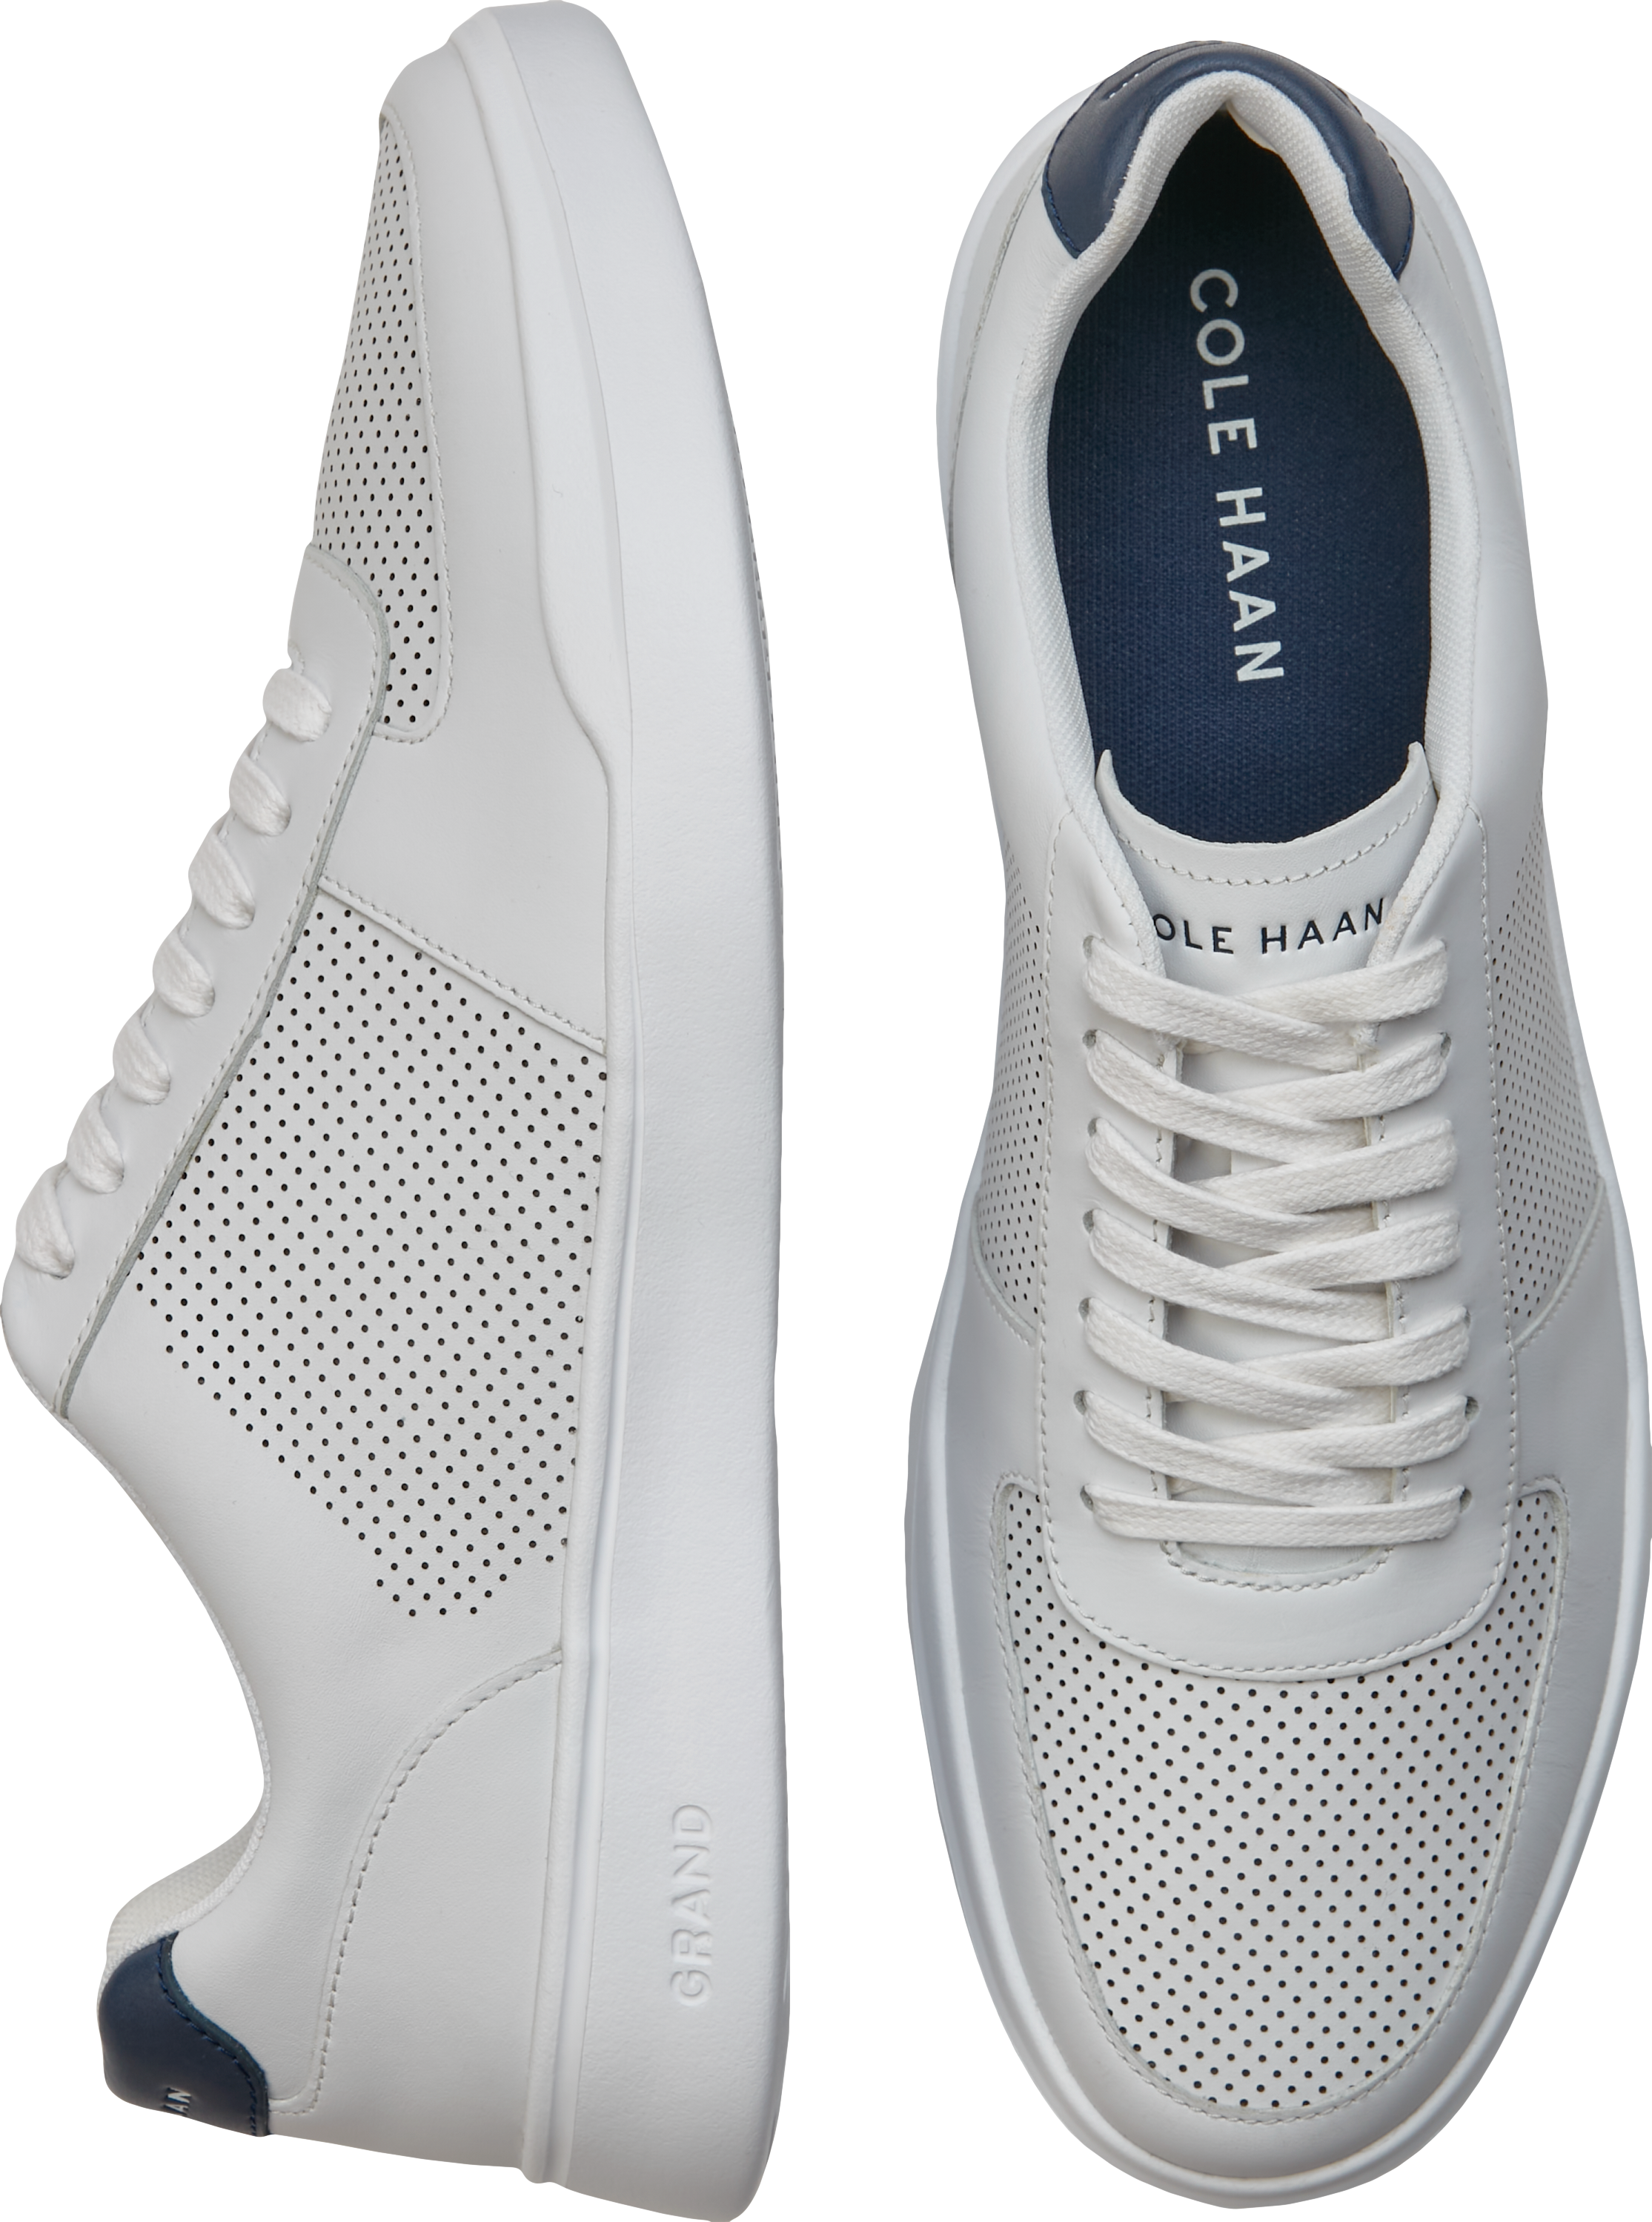 Haan Grand Leather Sneakers, White - Men's Shoes Wearhouse